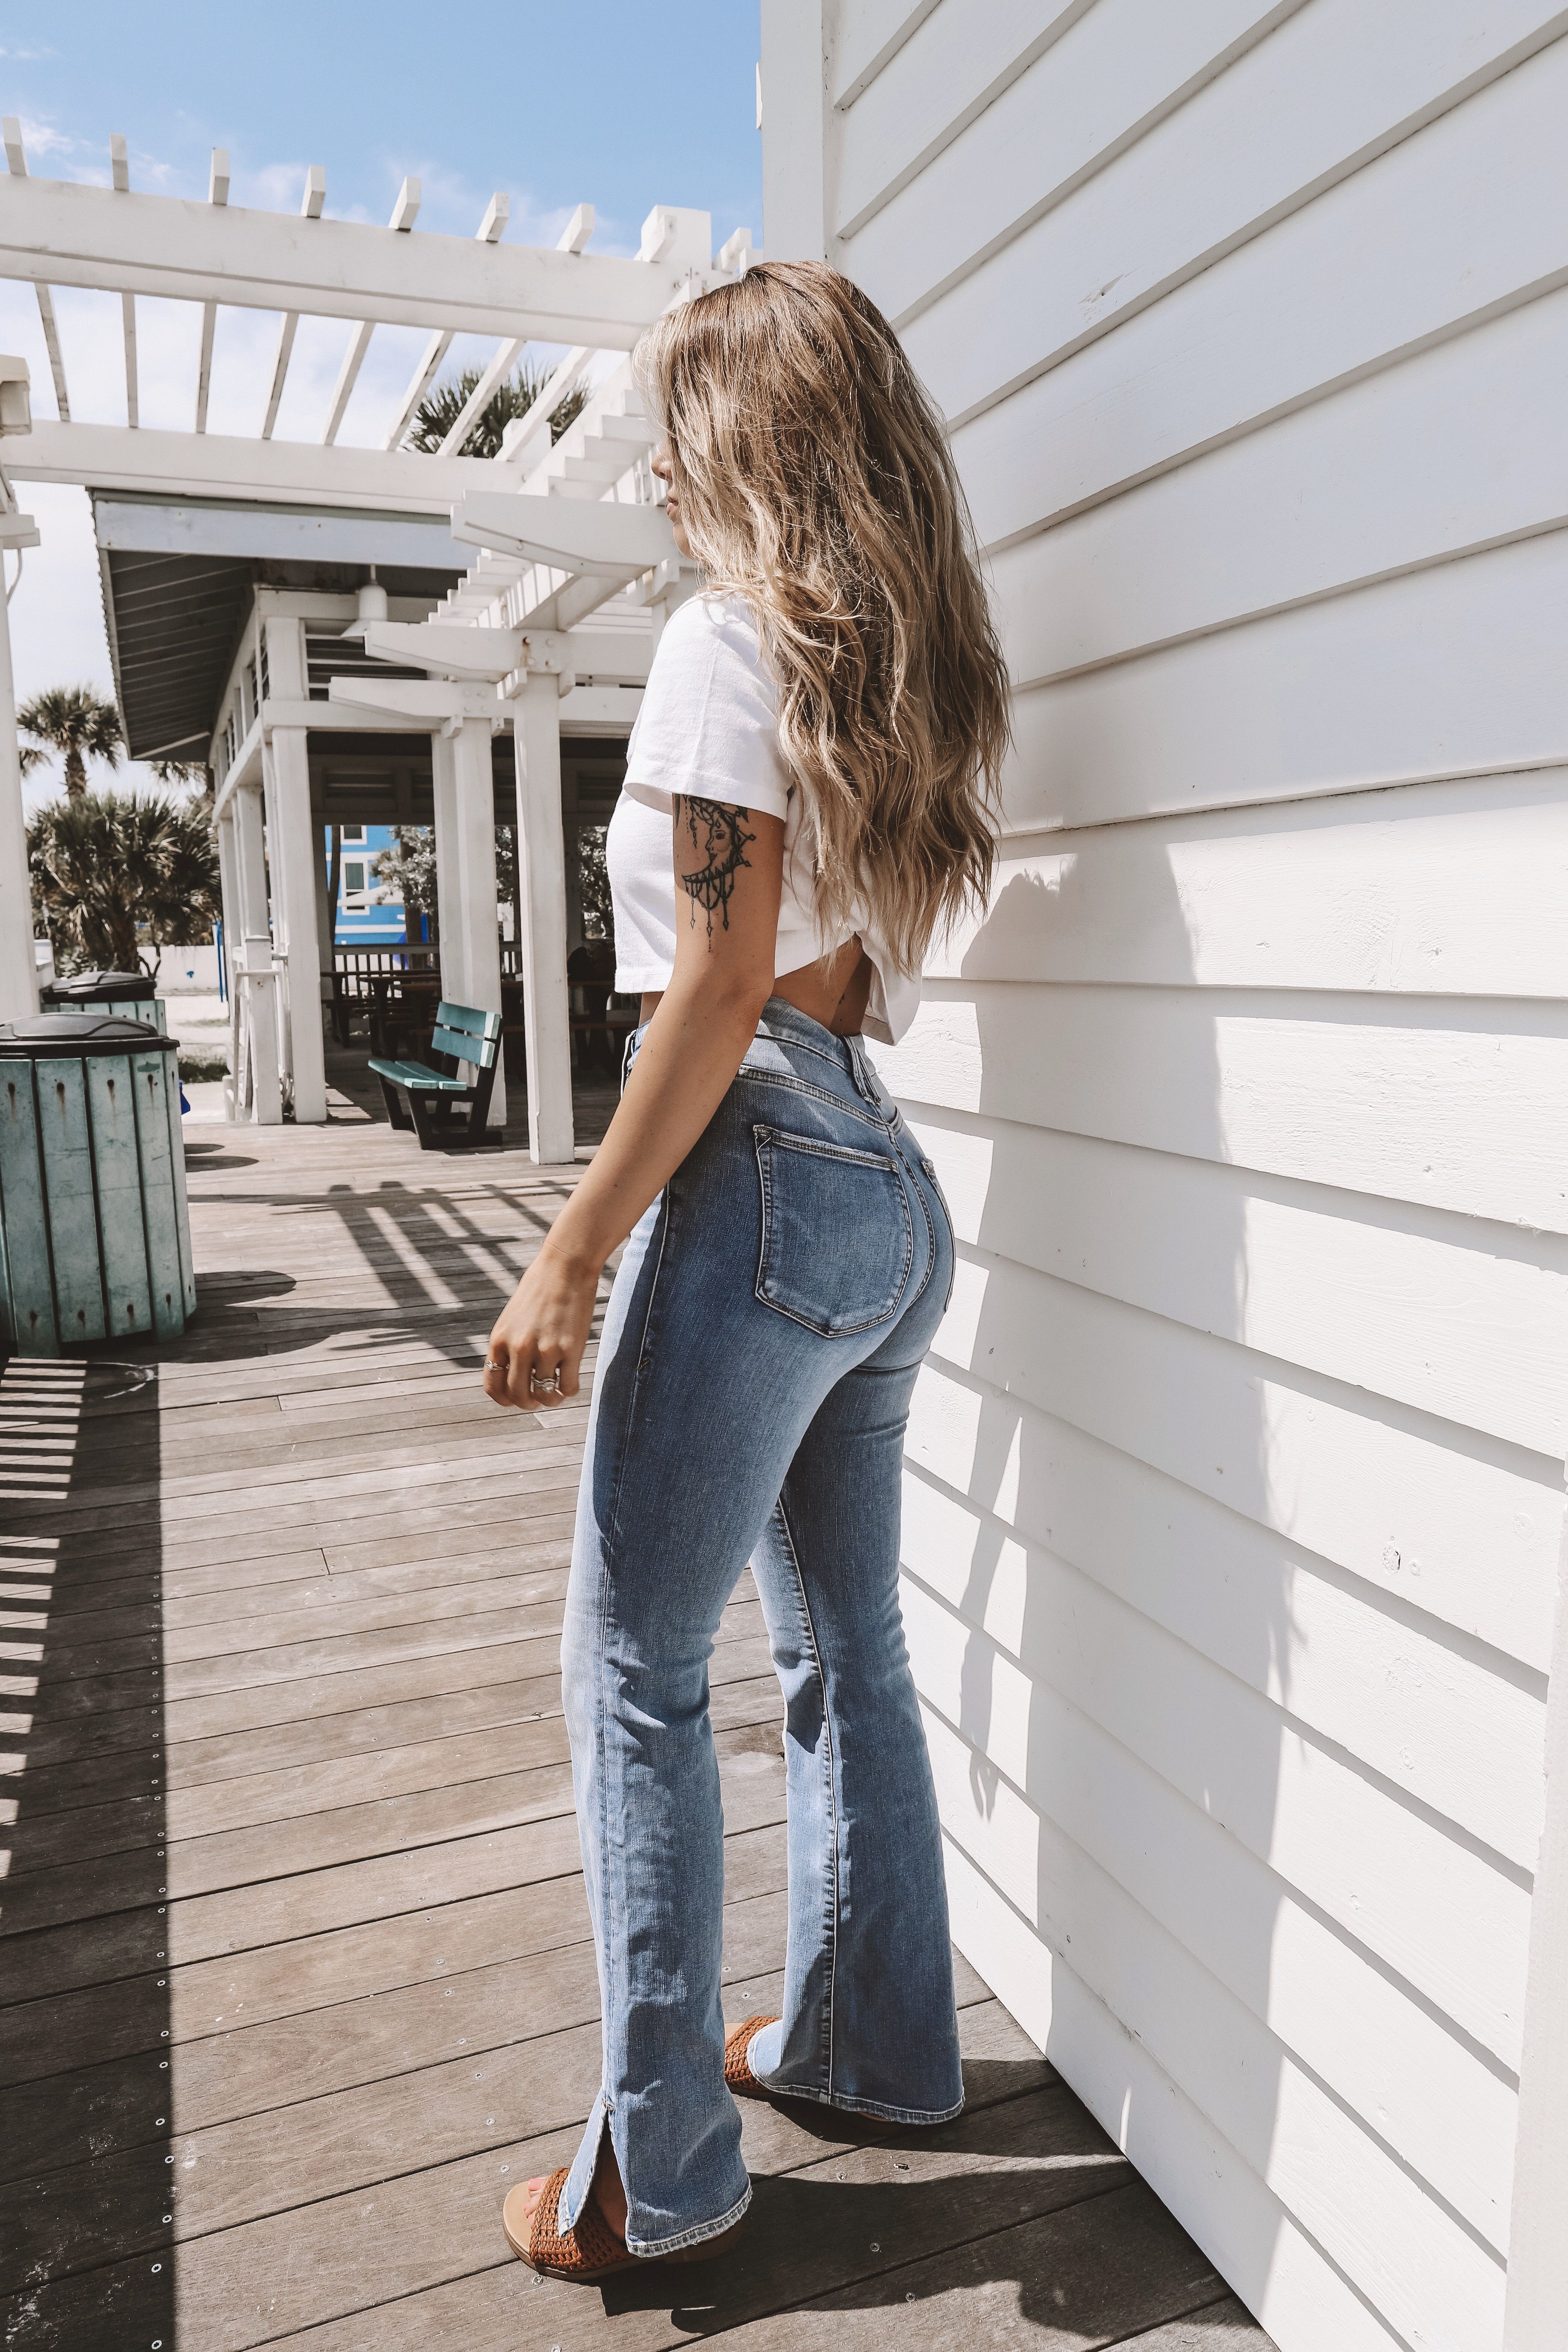 Flare denim jeans xx - Flare denim jeans xx -   21 style Jeans spring ideas